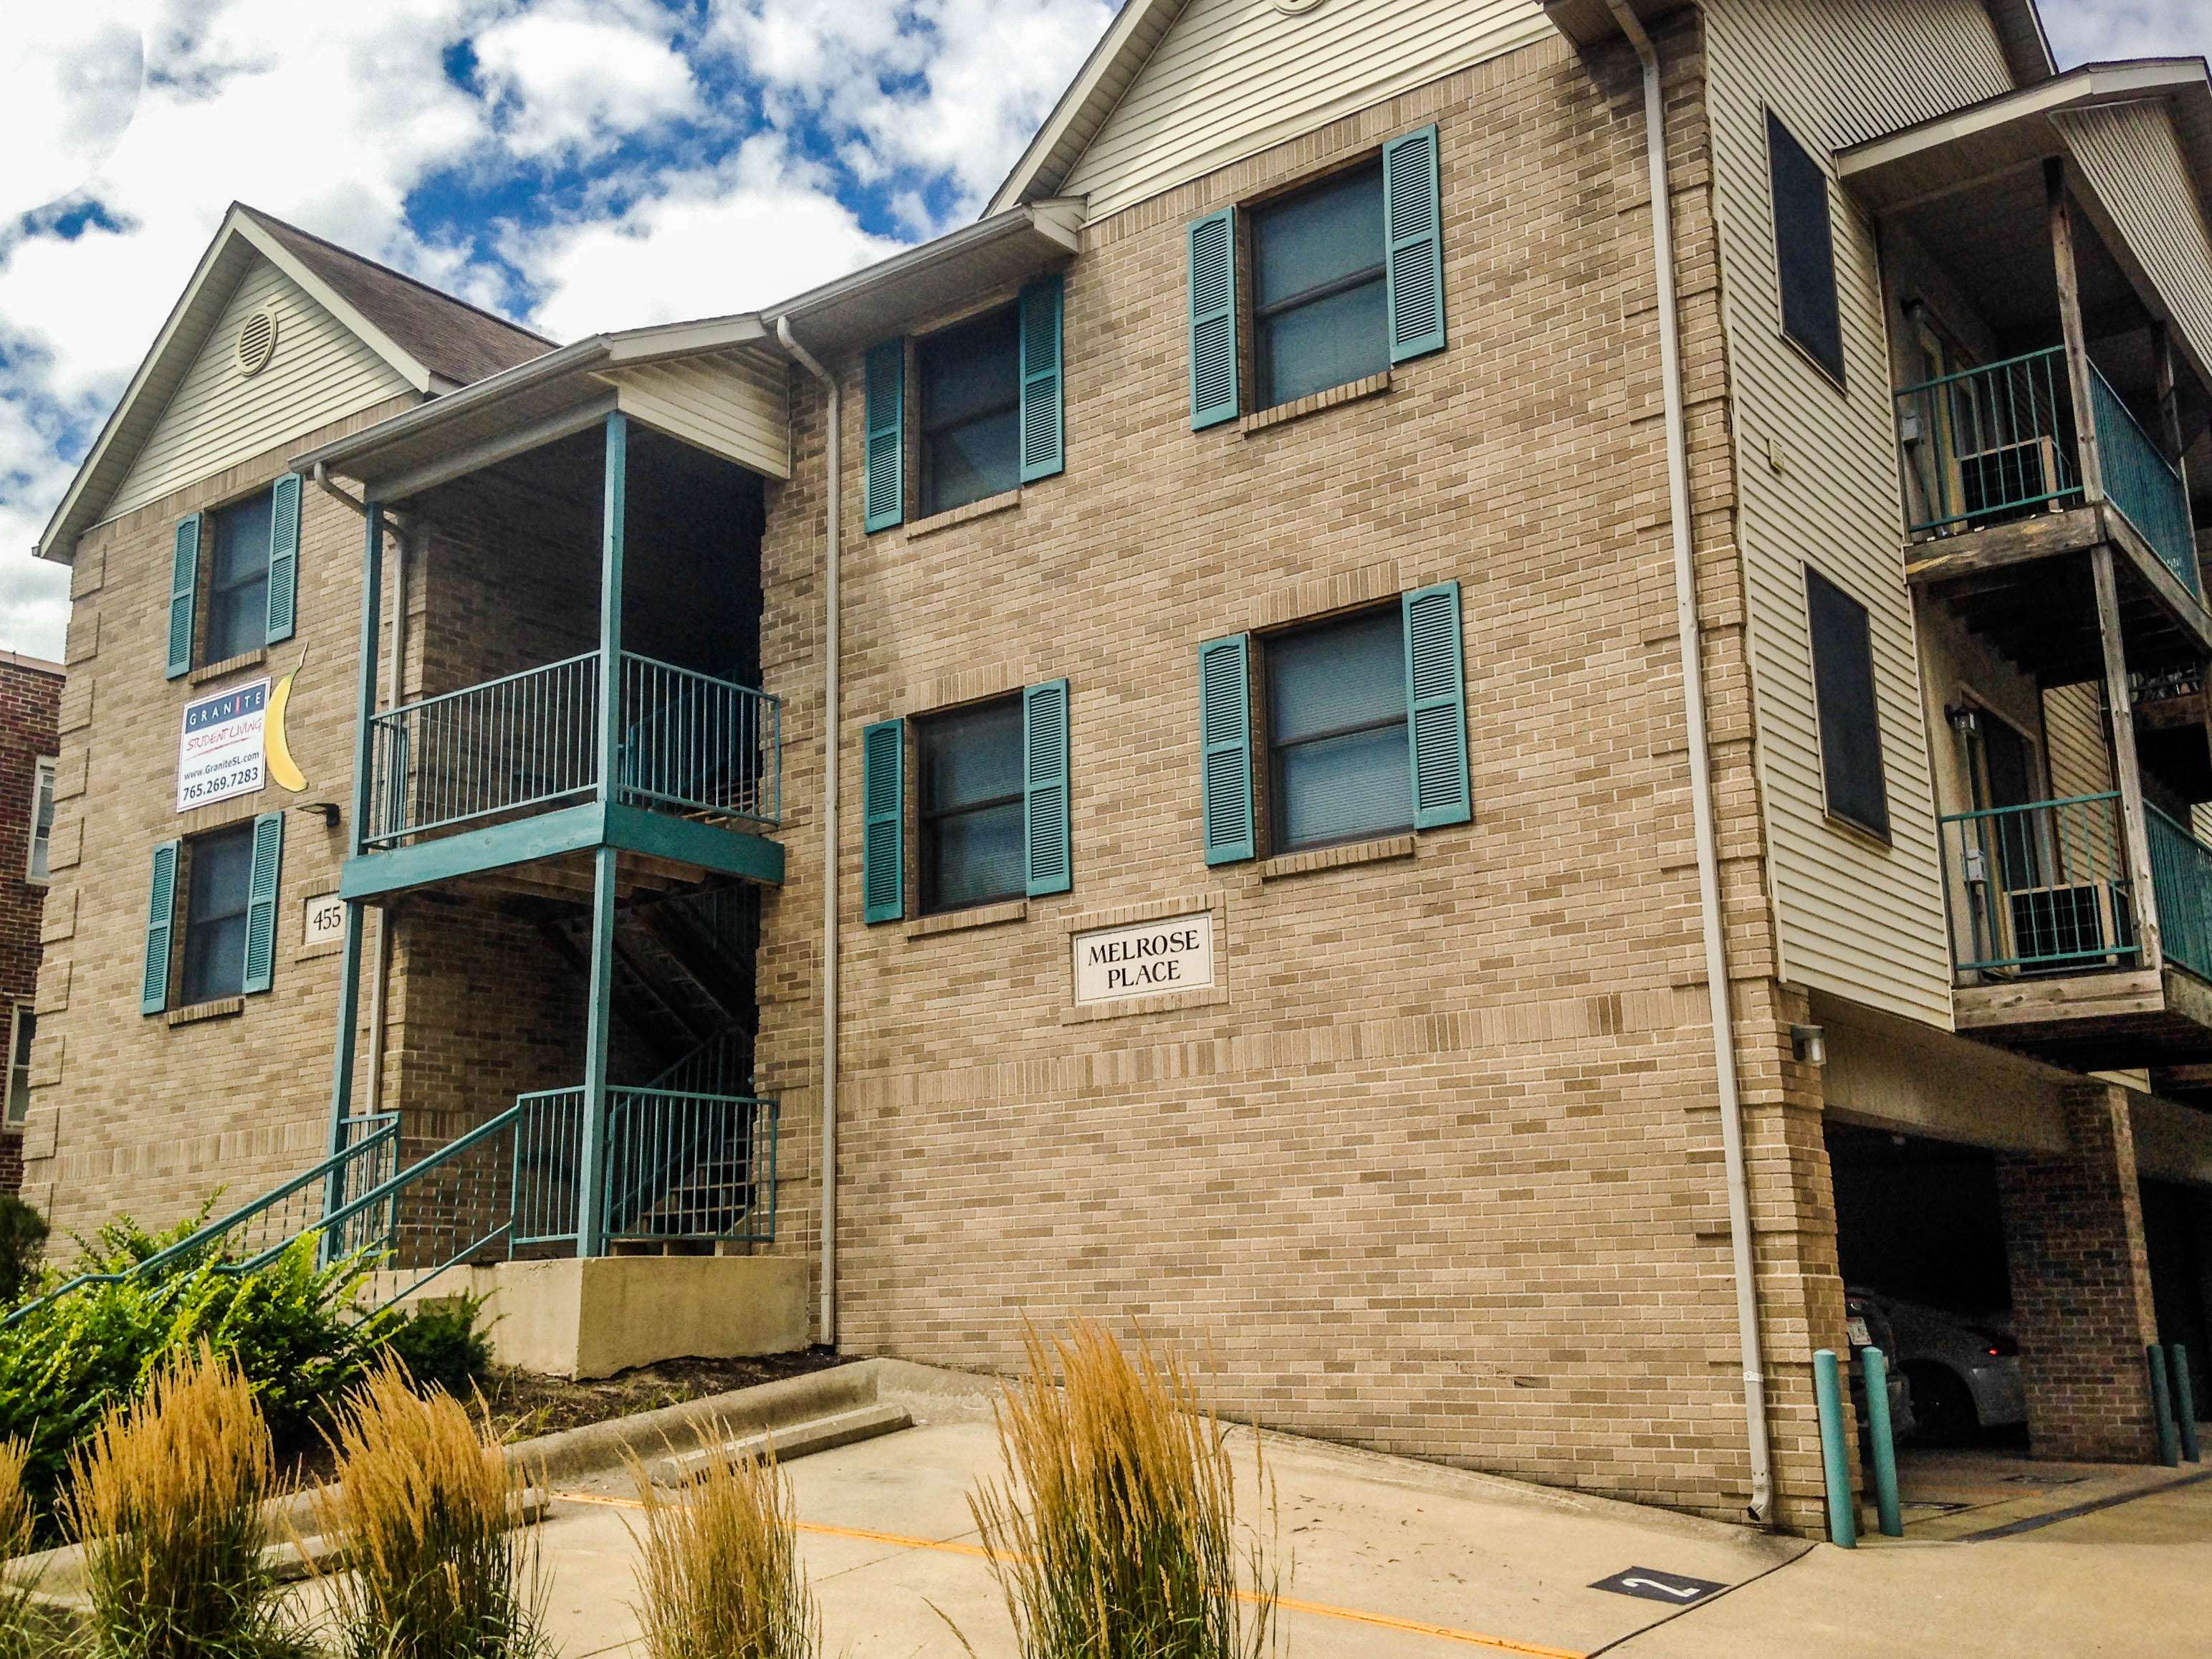 find-apartments/Melrose-Place/455-N.-Grant-Street-West-Lafayette/1508